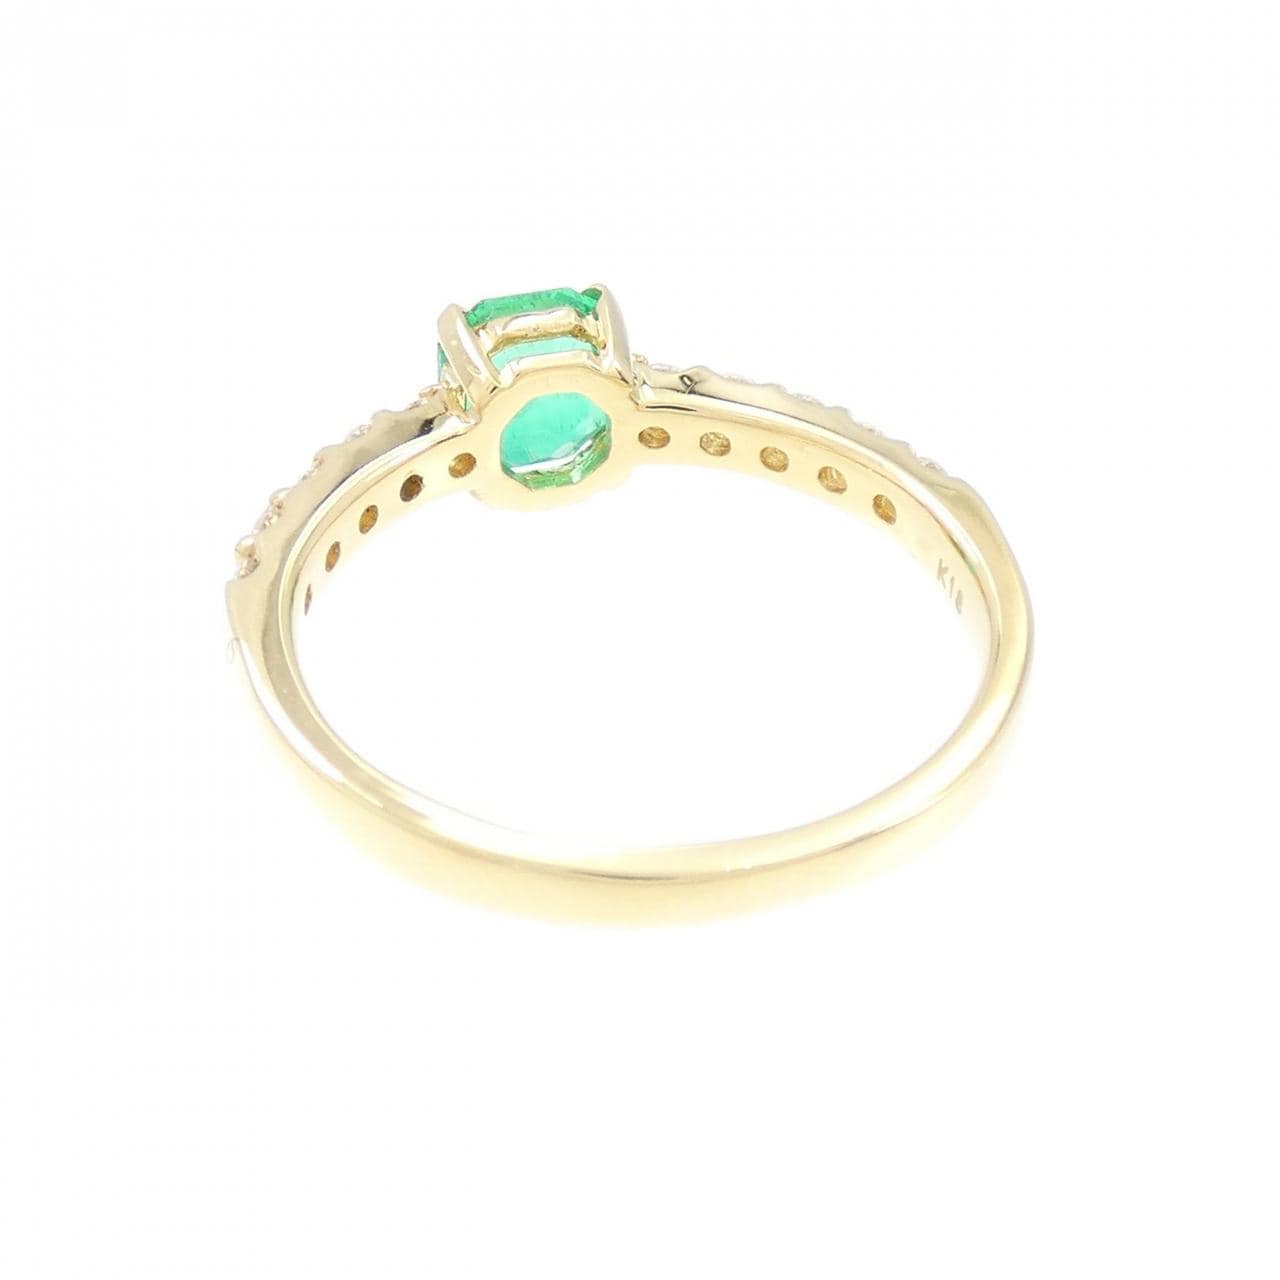 [Remake] K18YG emerald ring 0.65CT Made in Colombia